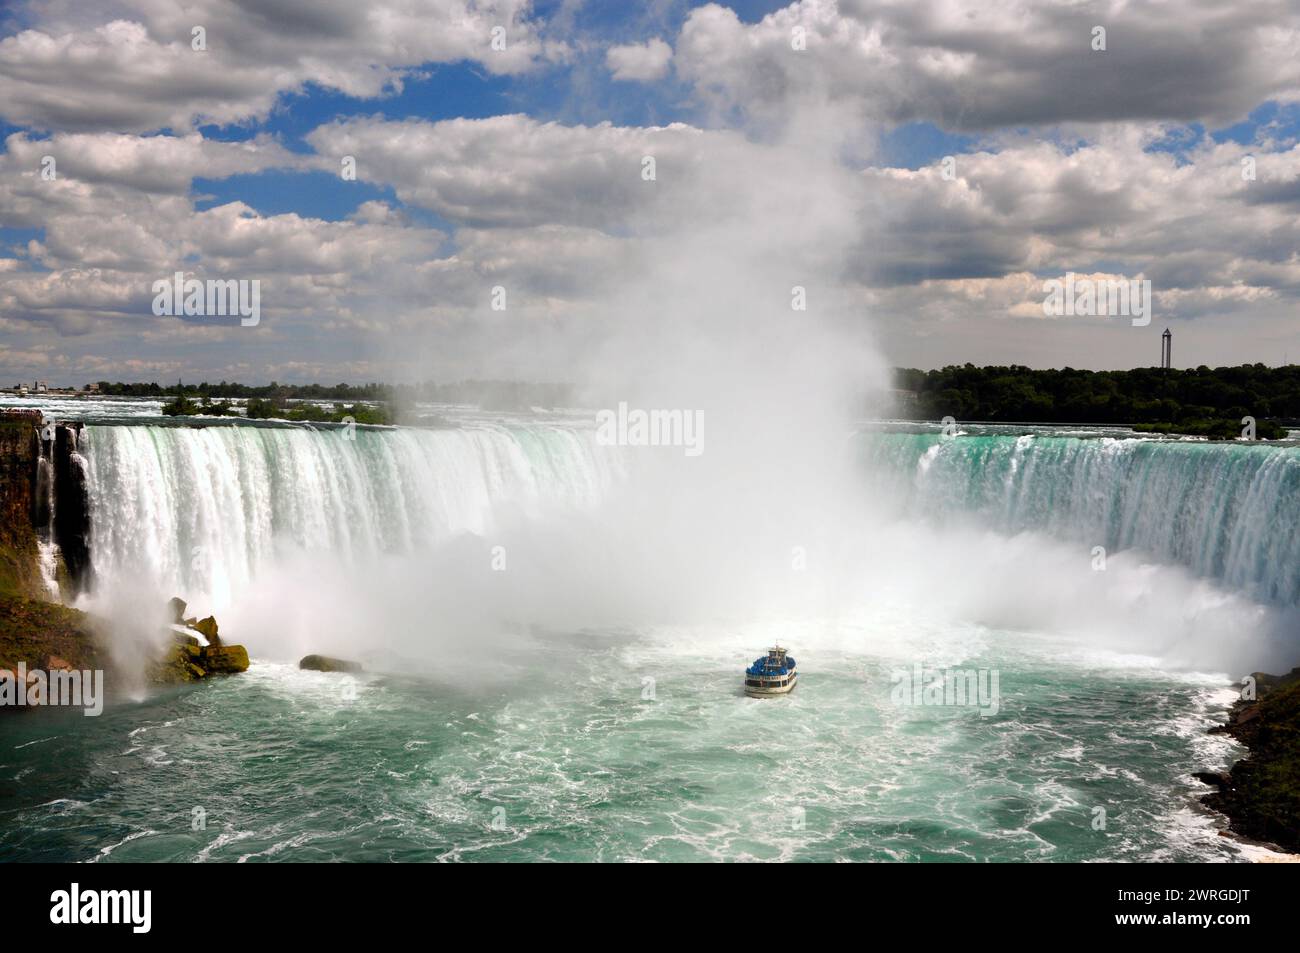 July 22, 2015 - Niagara Falls, Ontario, Canada: View of the iconic Horseshoe Falls and Maid of the Mist tour boat. Stock Photo